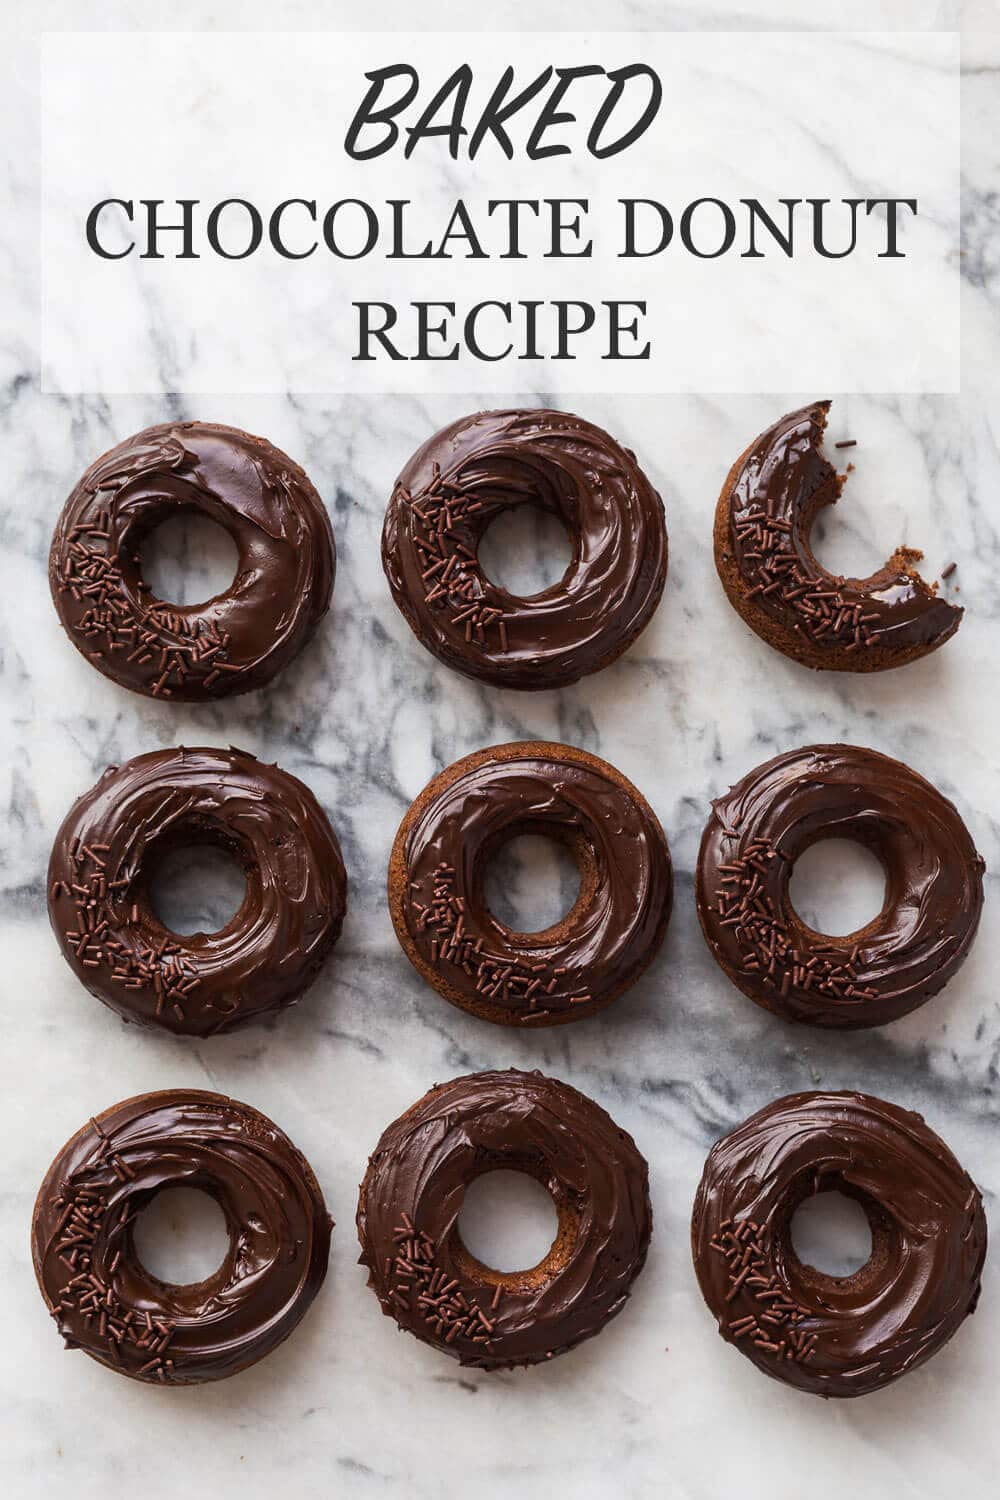 nine double chocolate donuts that are chocolate cake donuts topped with chocolate ganache glaze and chocolate sprinkles